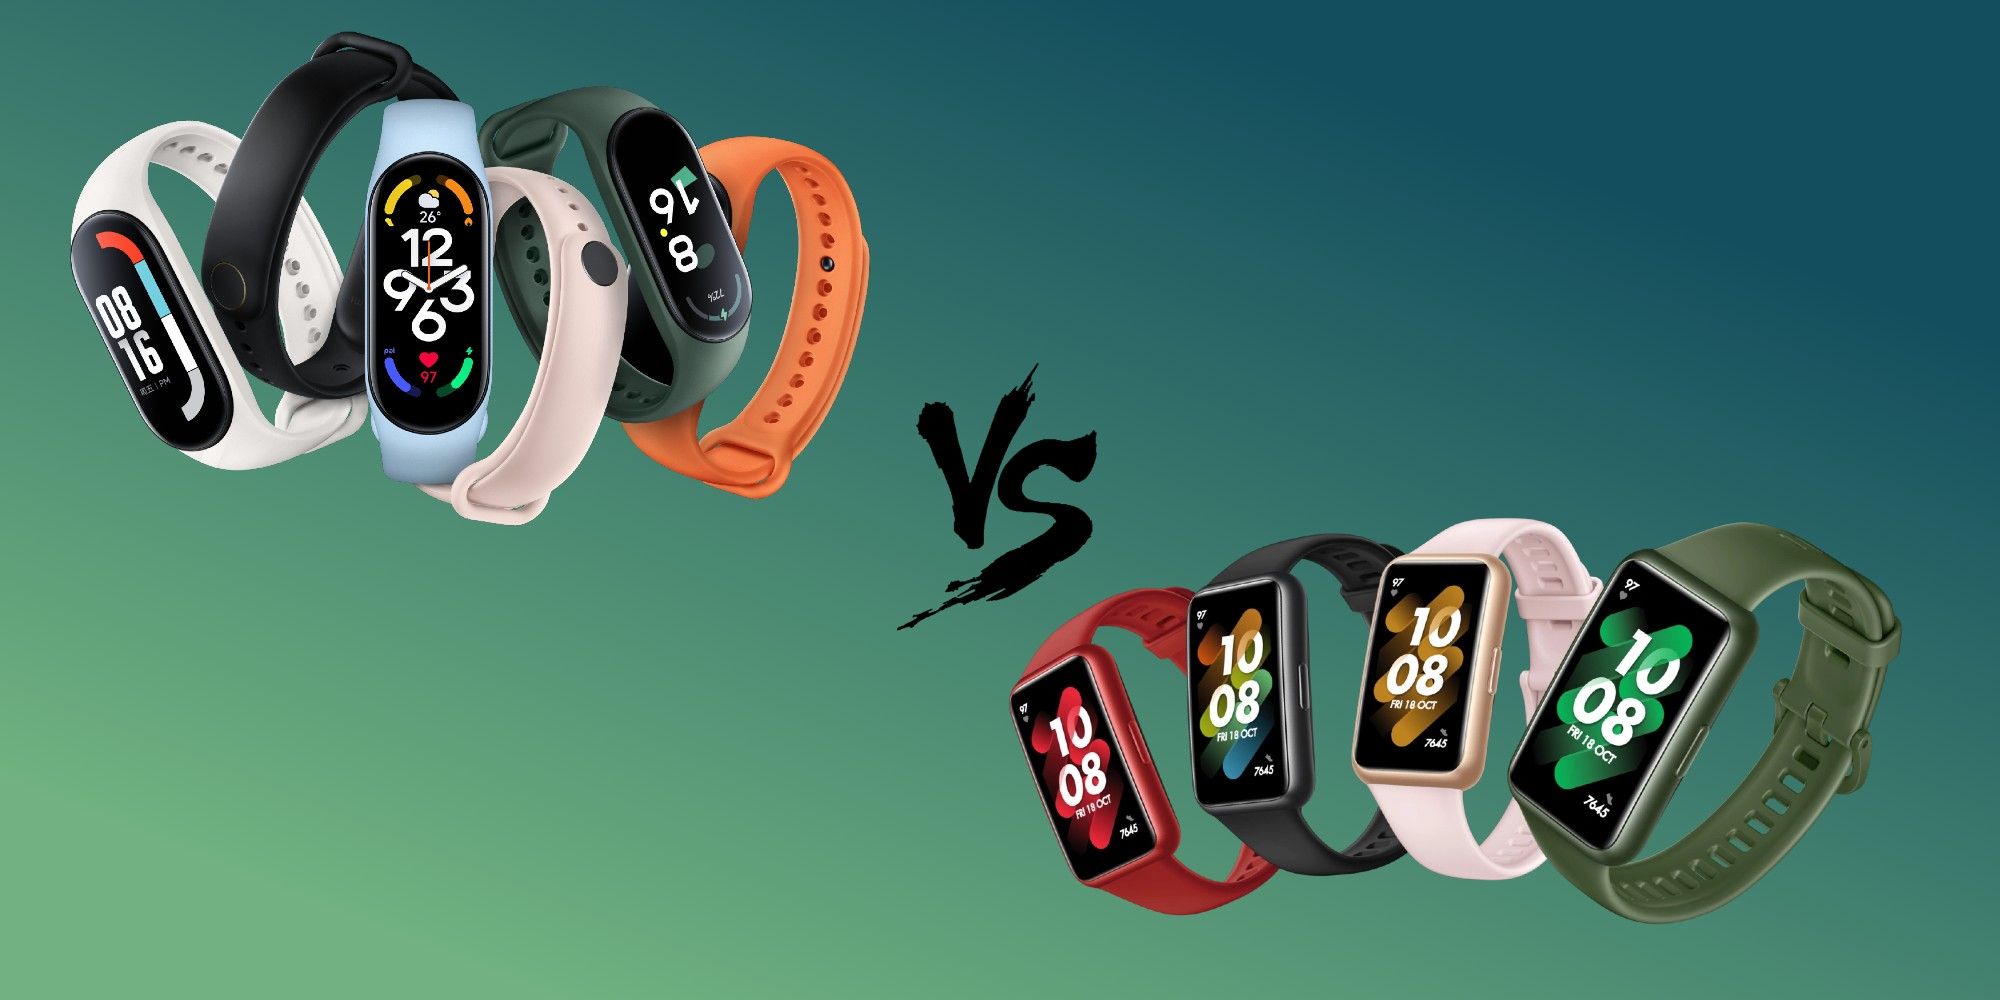 Which Fitness Tracker Is Better?